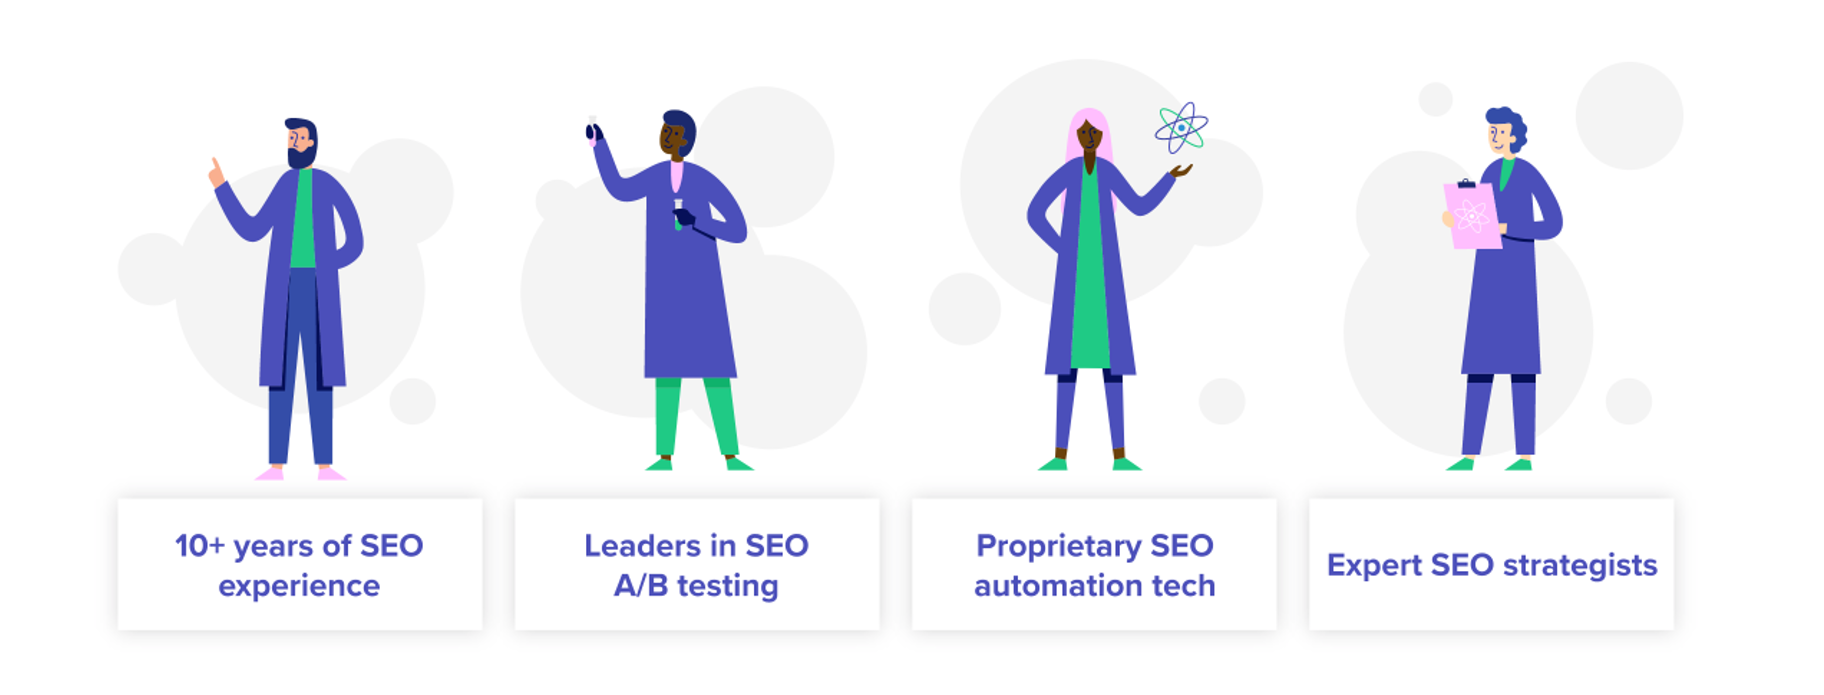 seo-related roles at rankscience